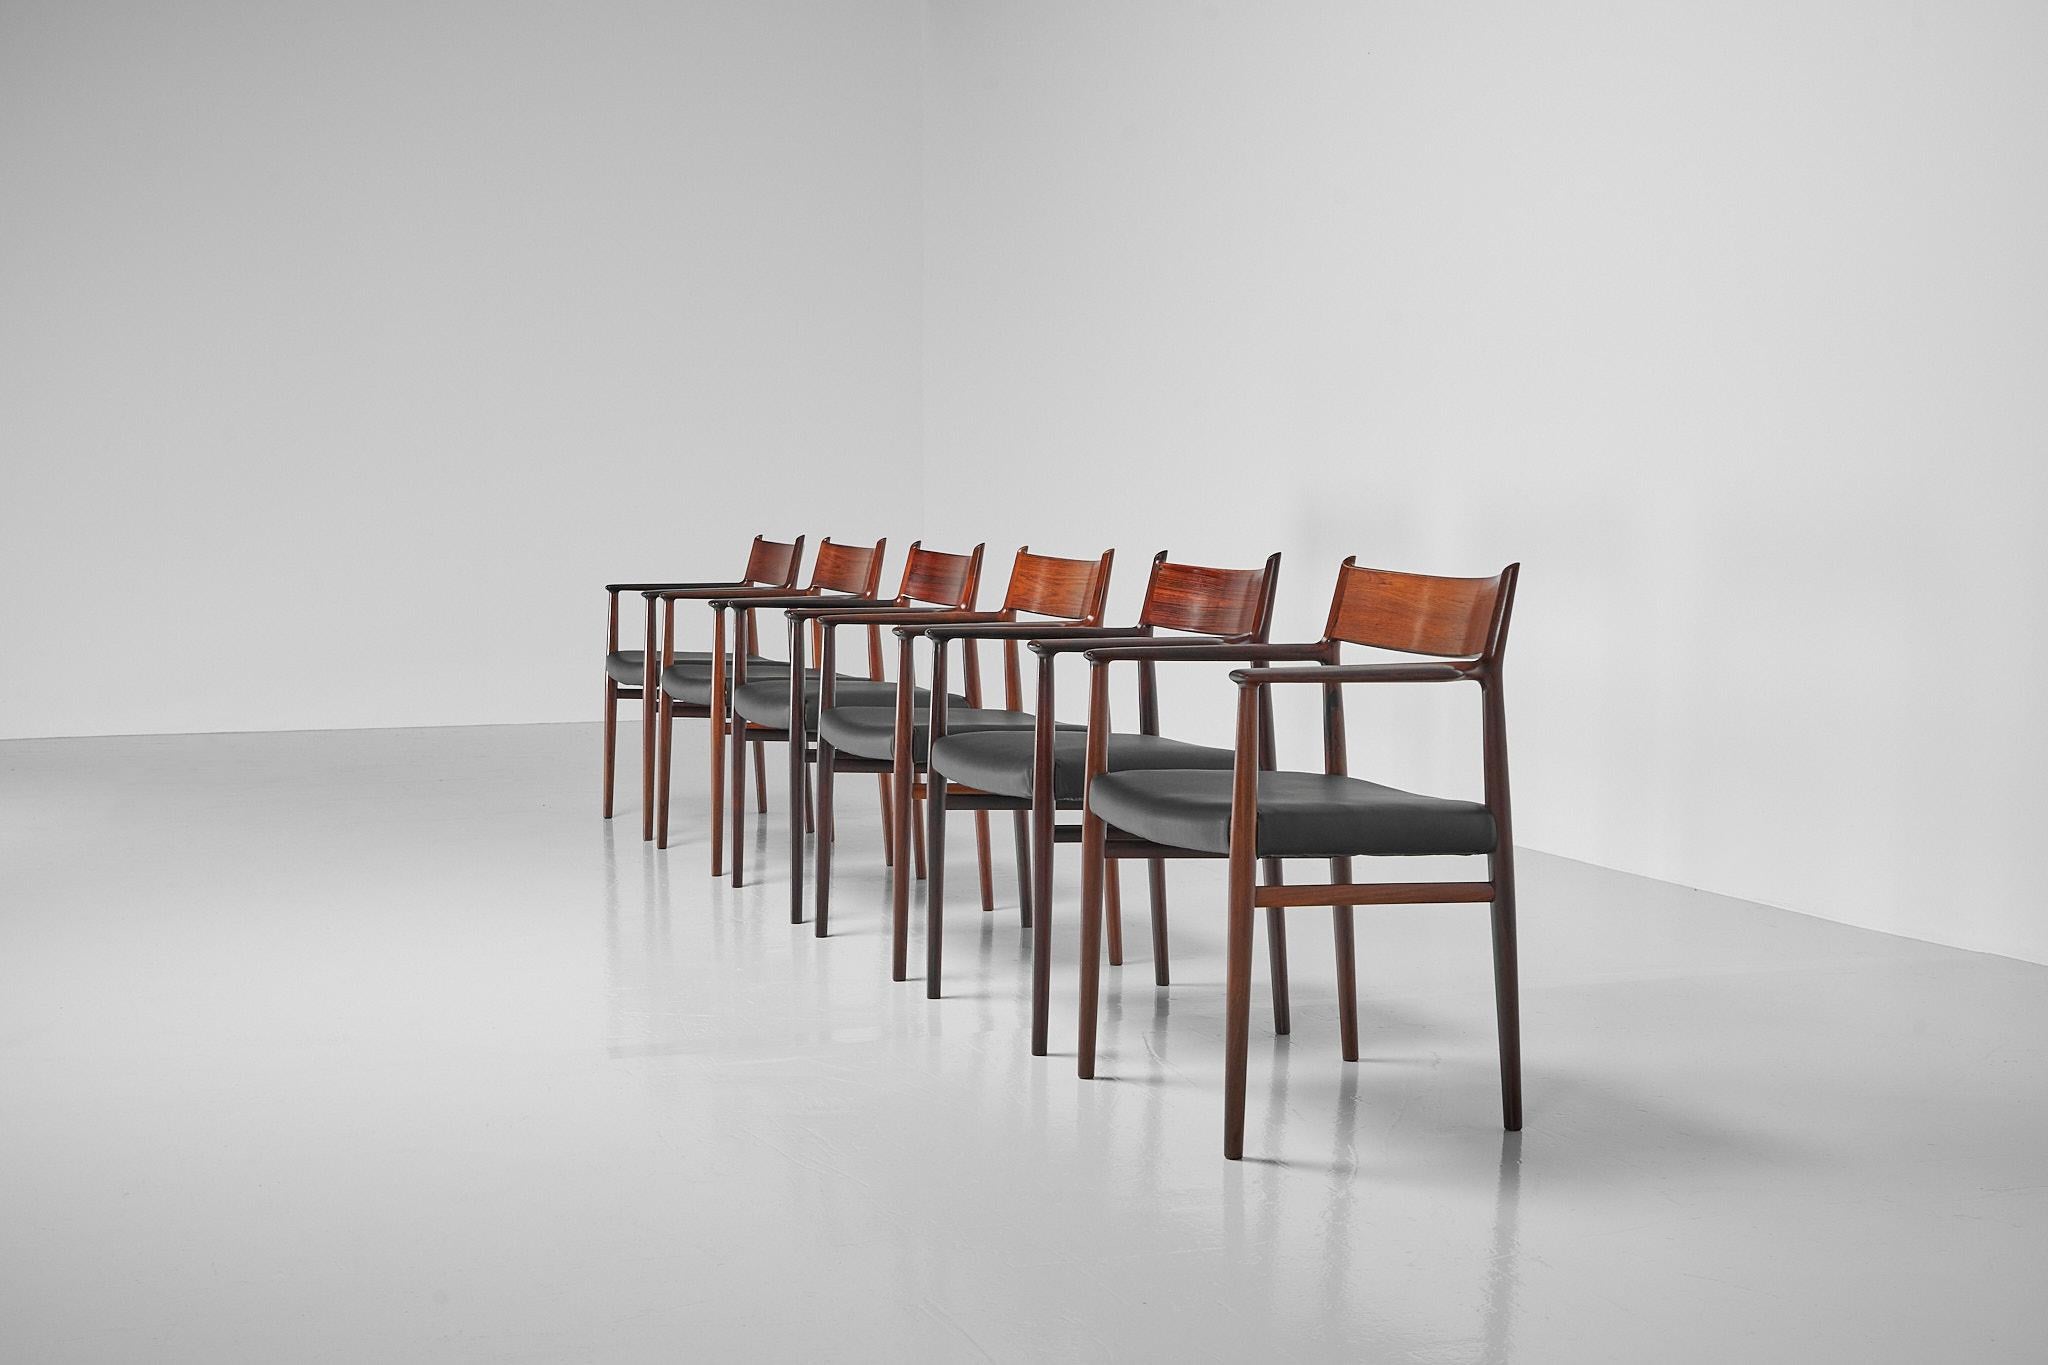 Superb set of 6 model 418b dining armchairs designed by Arne Vodder and manufactured by Sibast Mobler, Denmark 1960. These sleek chairs have solid rosewood frames which are very elegantly sculpted. The curved backrest is where the beautiful rosewood